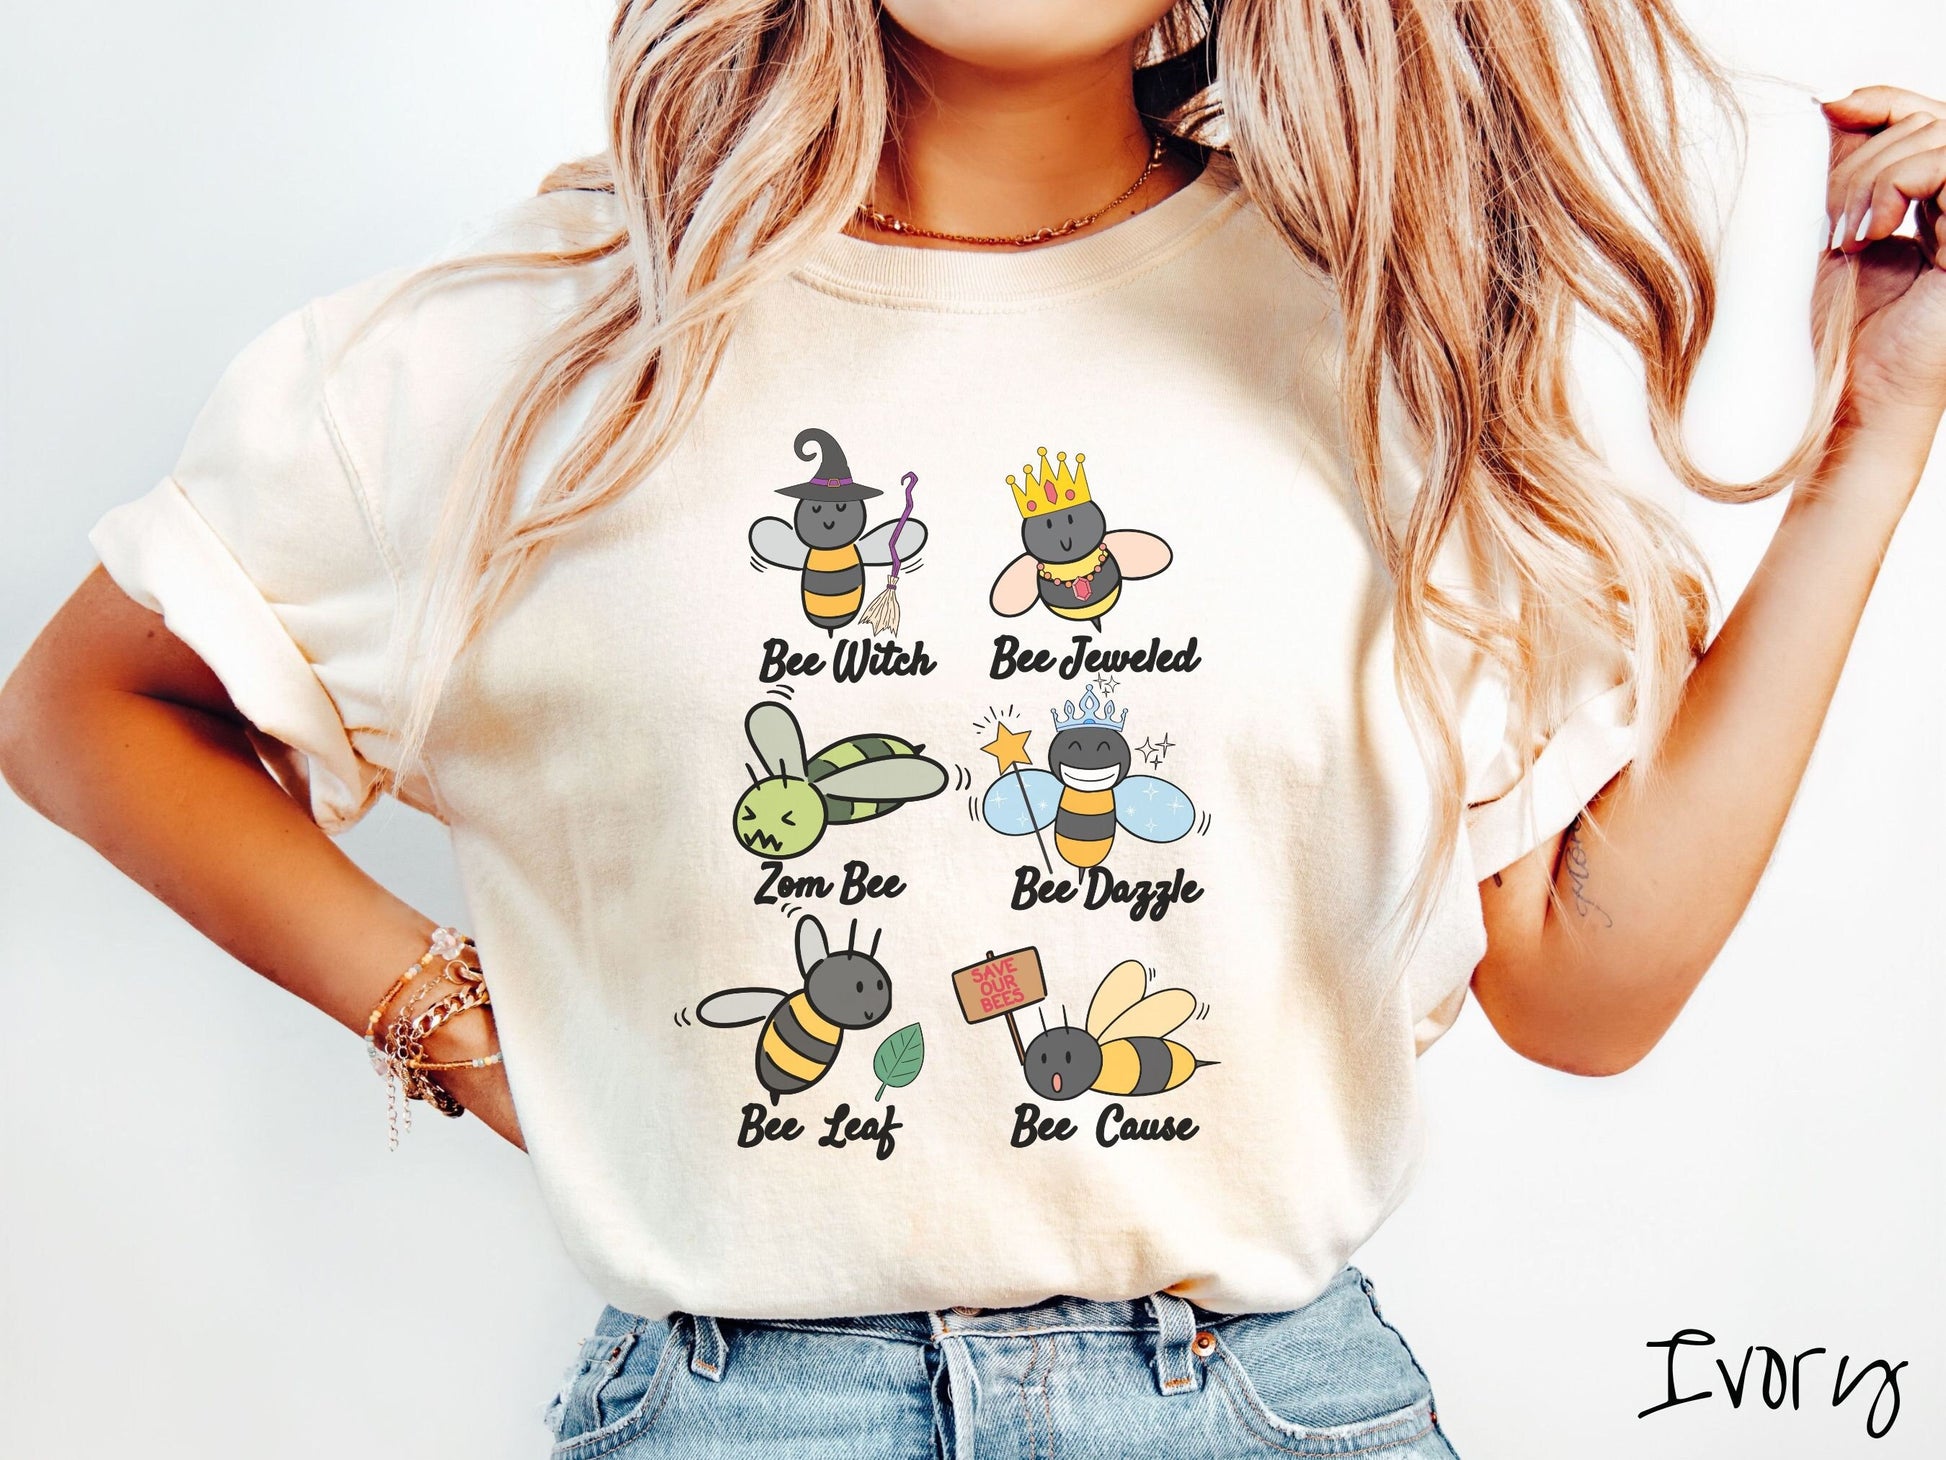 A woman wearing a cute, vintage ivory colored comfy sweatshirt that has six puns that play on honey bees accompanied with bee drawings. The puns are Bee Witch, Bee Jeweled, Zom Bee, Bee Dazzle, Bee Leaf, and Bee Cause.